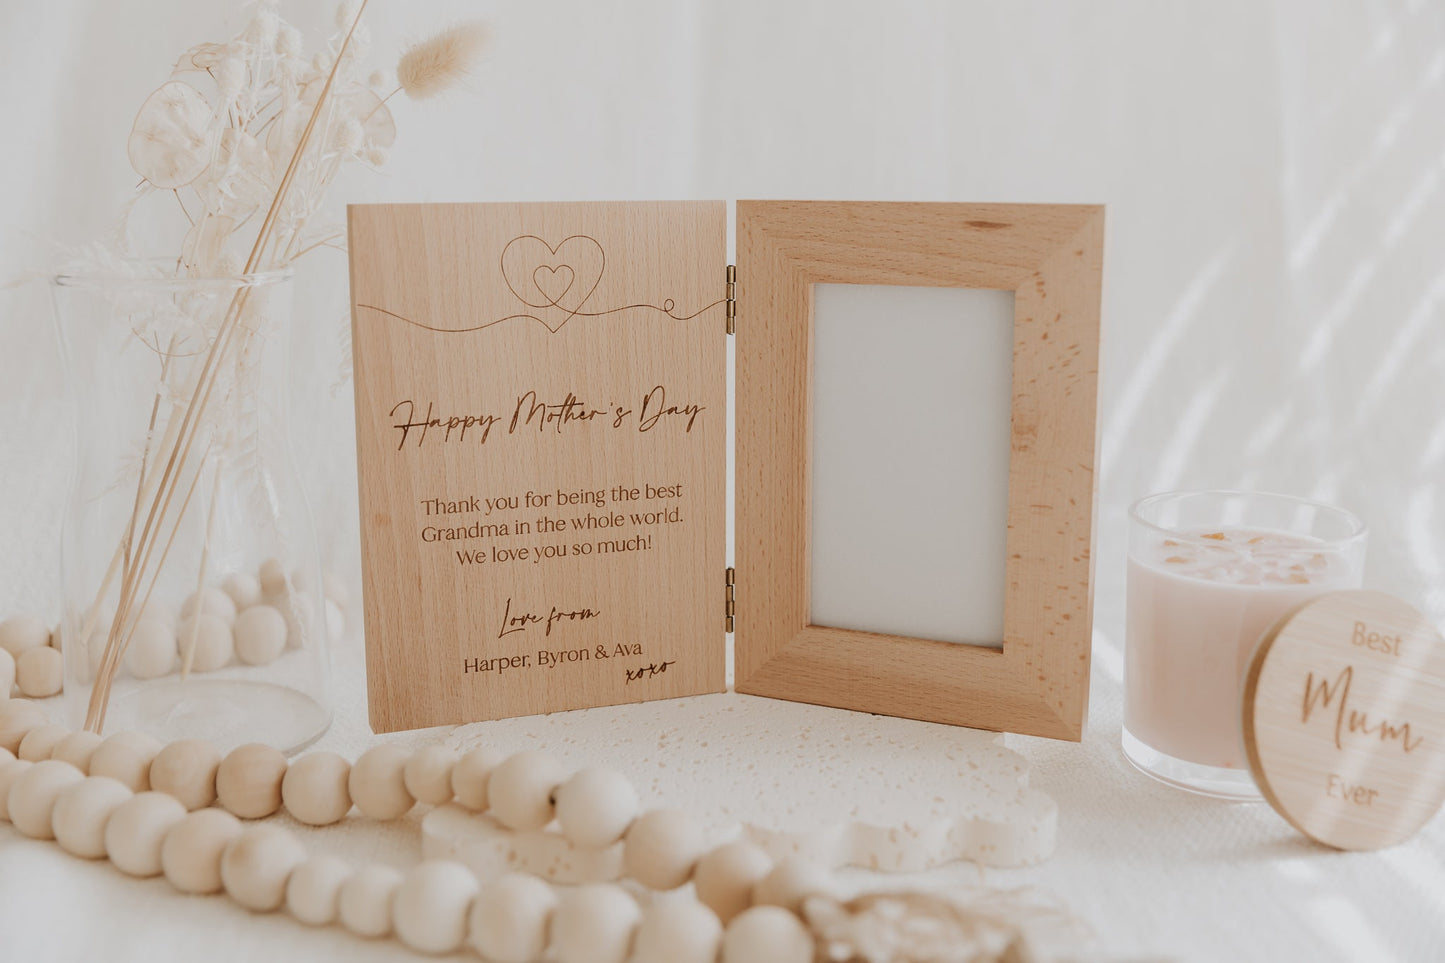 Happy Mother’s Day folding book style photo frame engraved personalised grandma